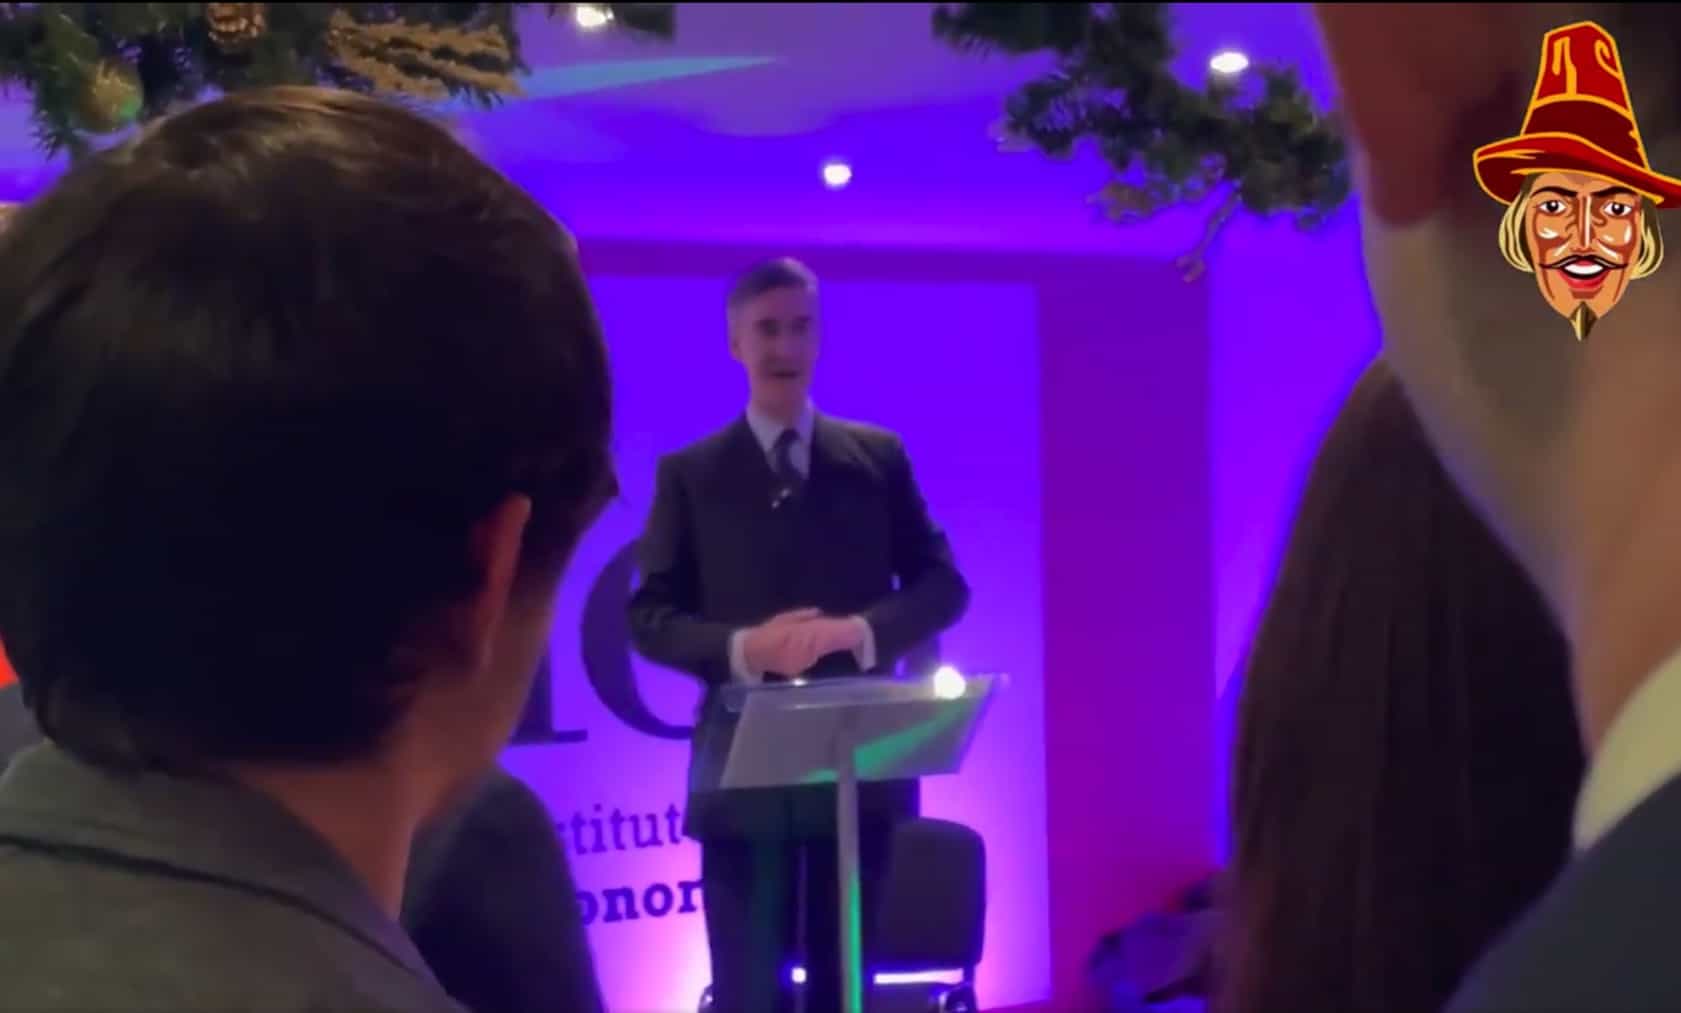 Now Jacob Rees-Mogg is caught joking about Downing Street Xmas Party